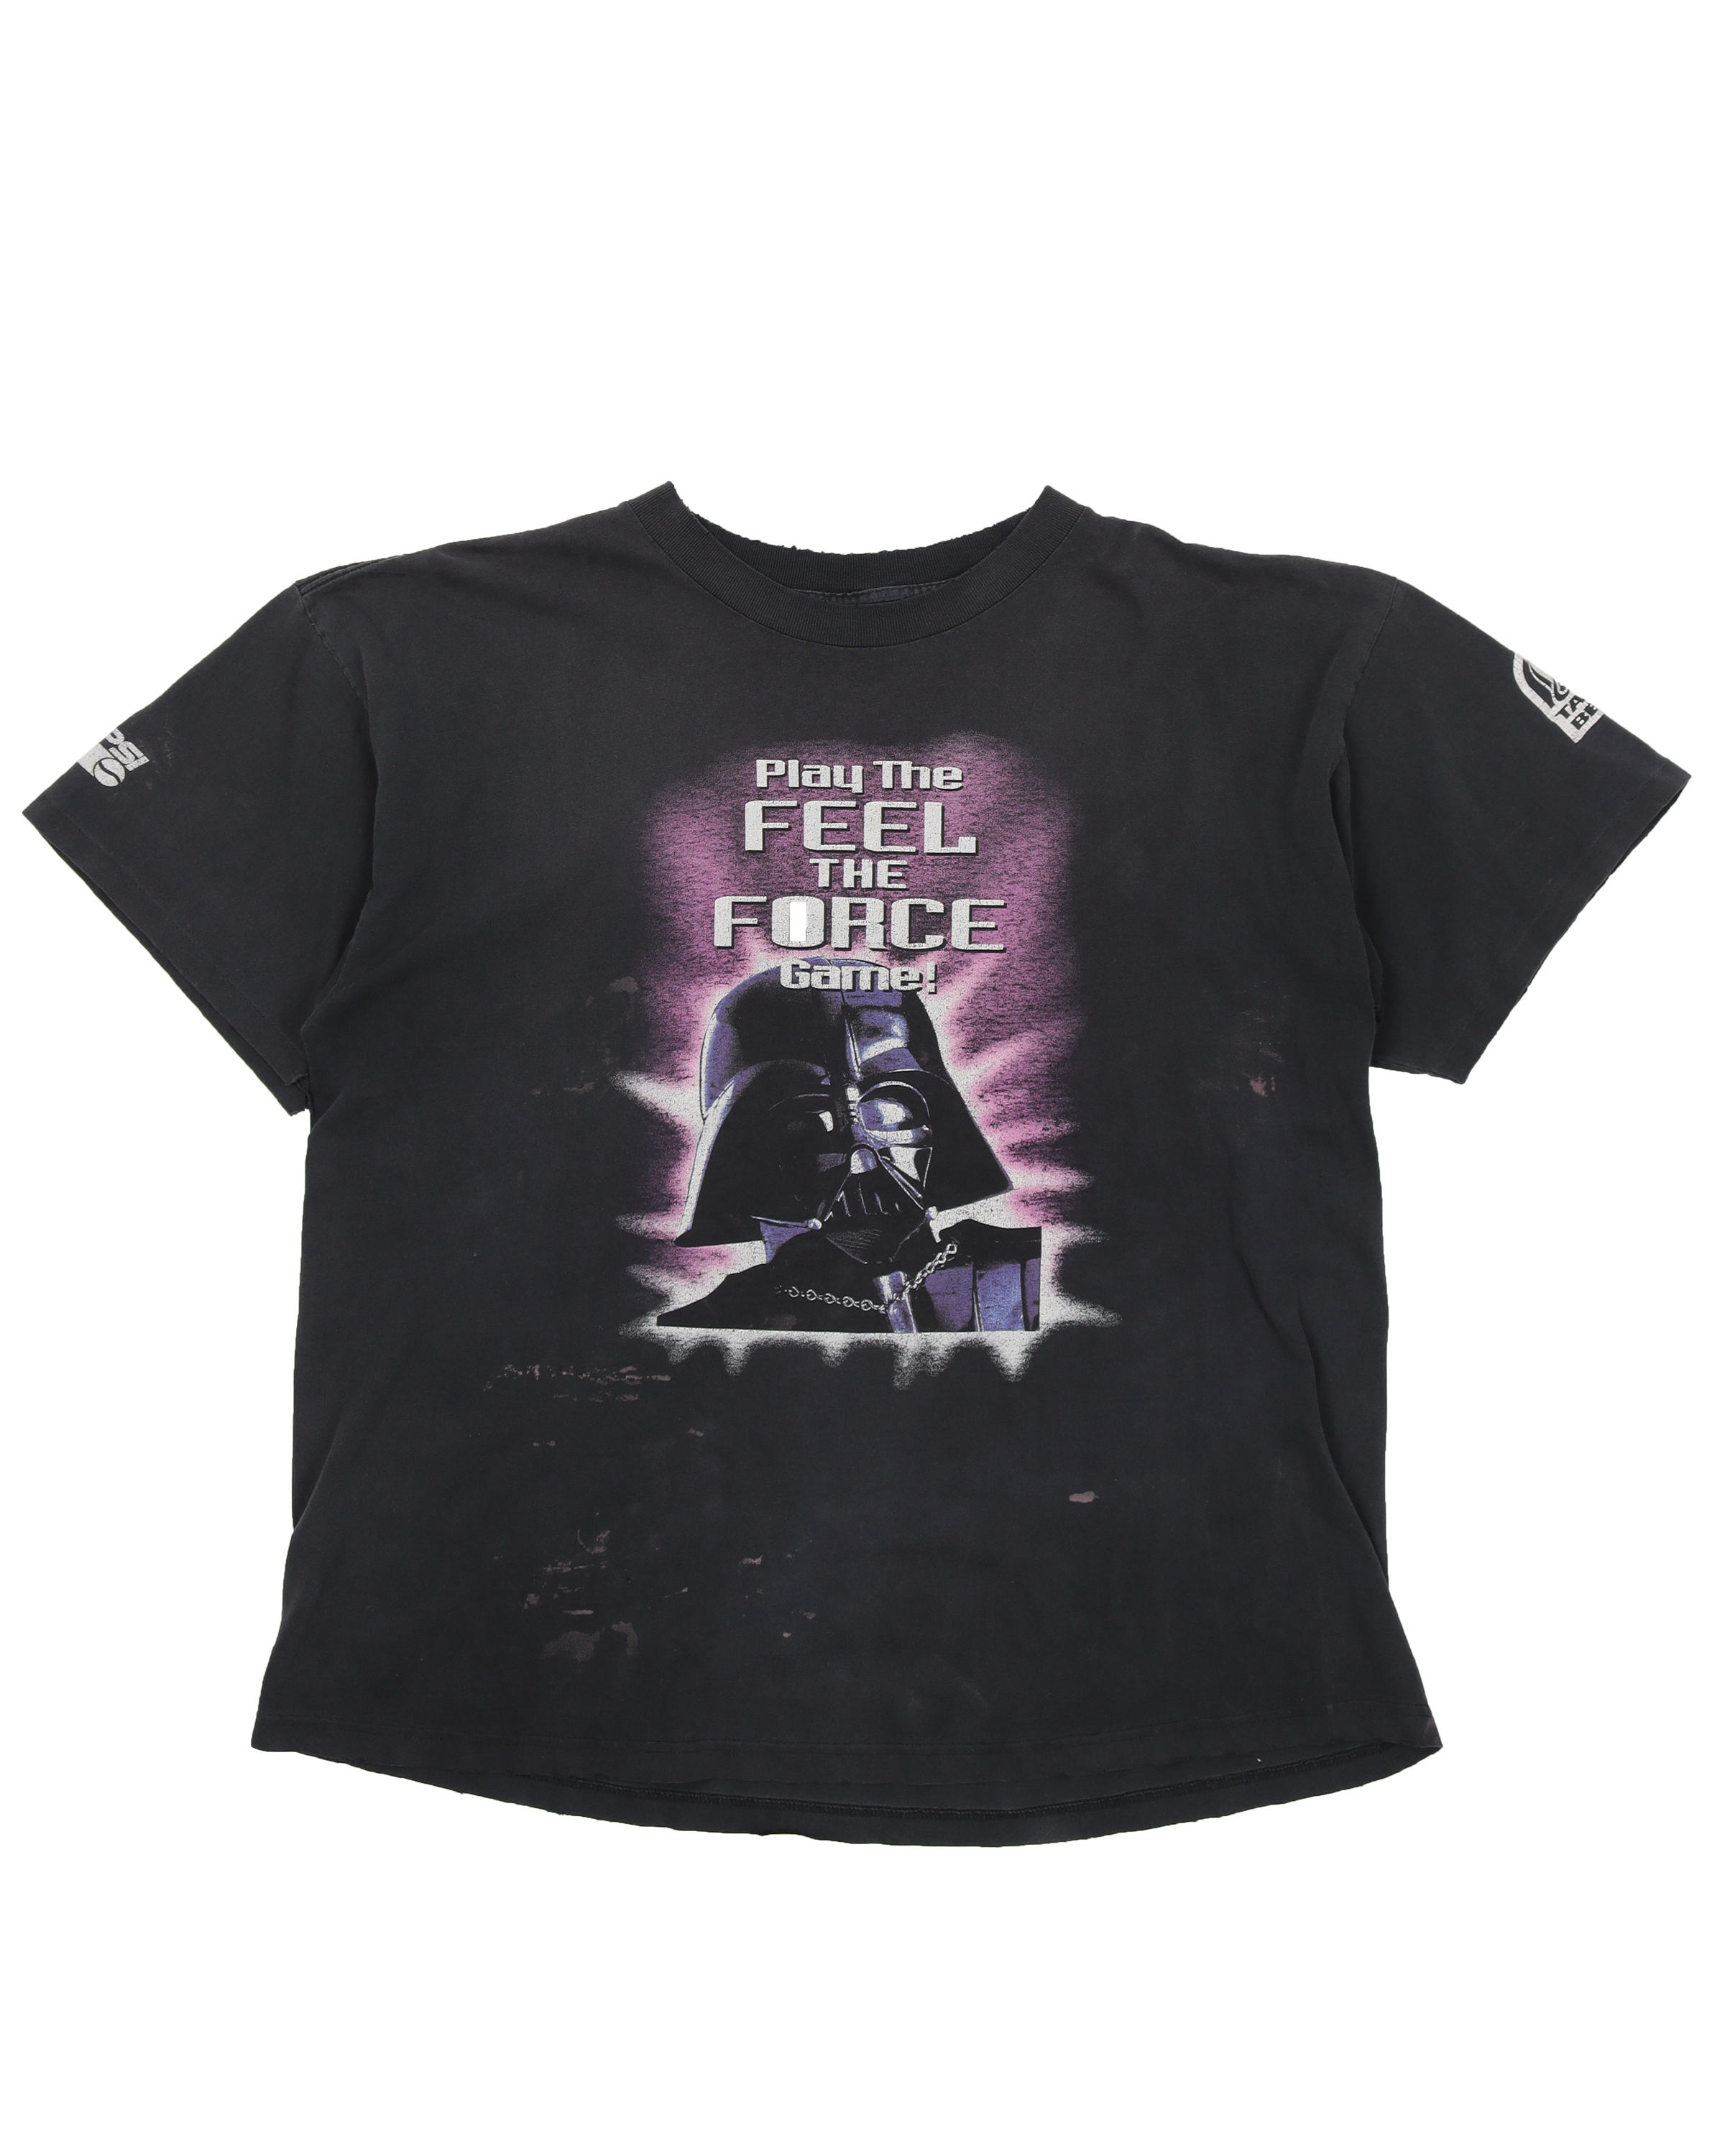 Star Wars "Feel The Force" Game T-Shirt